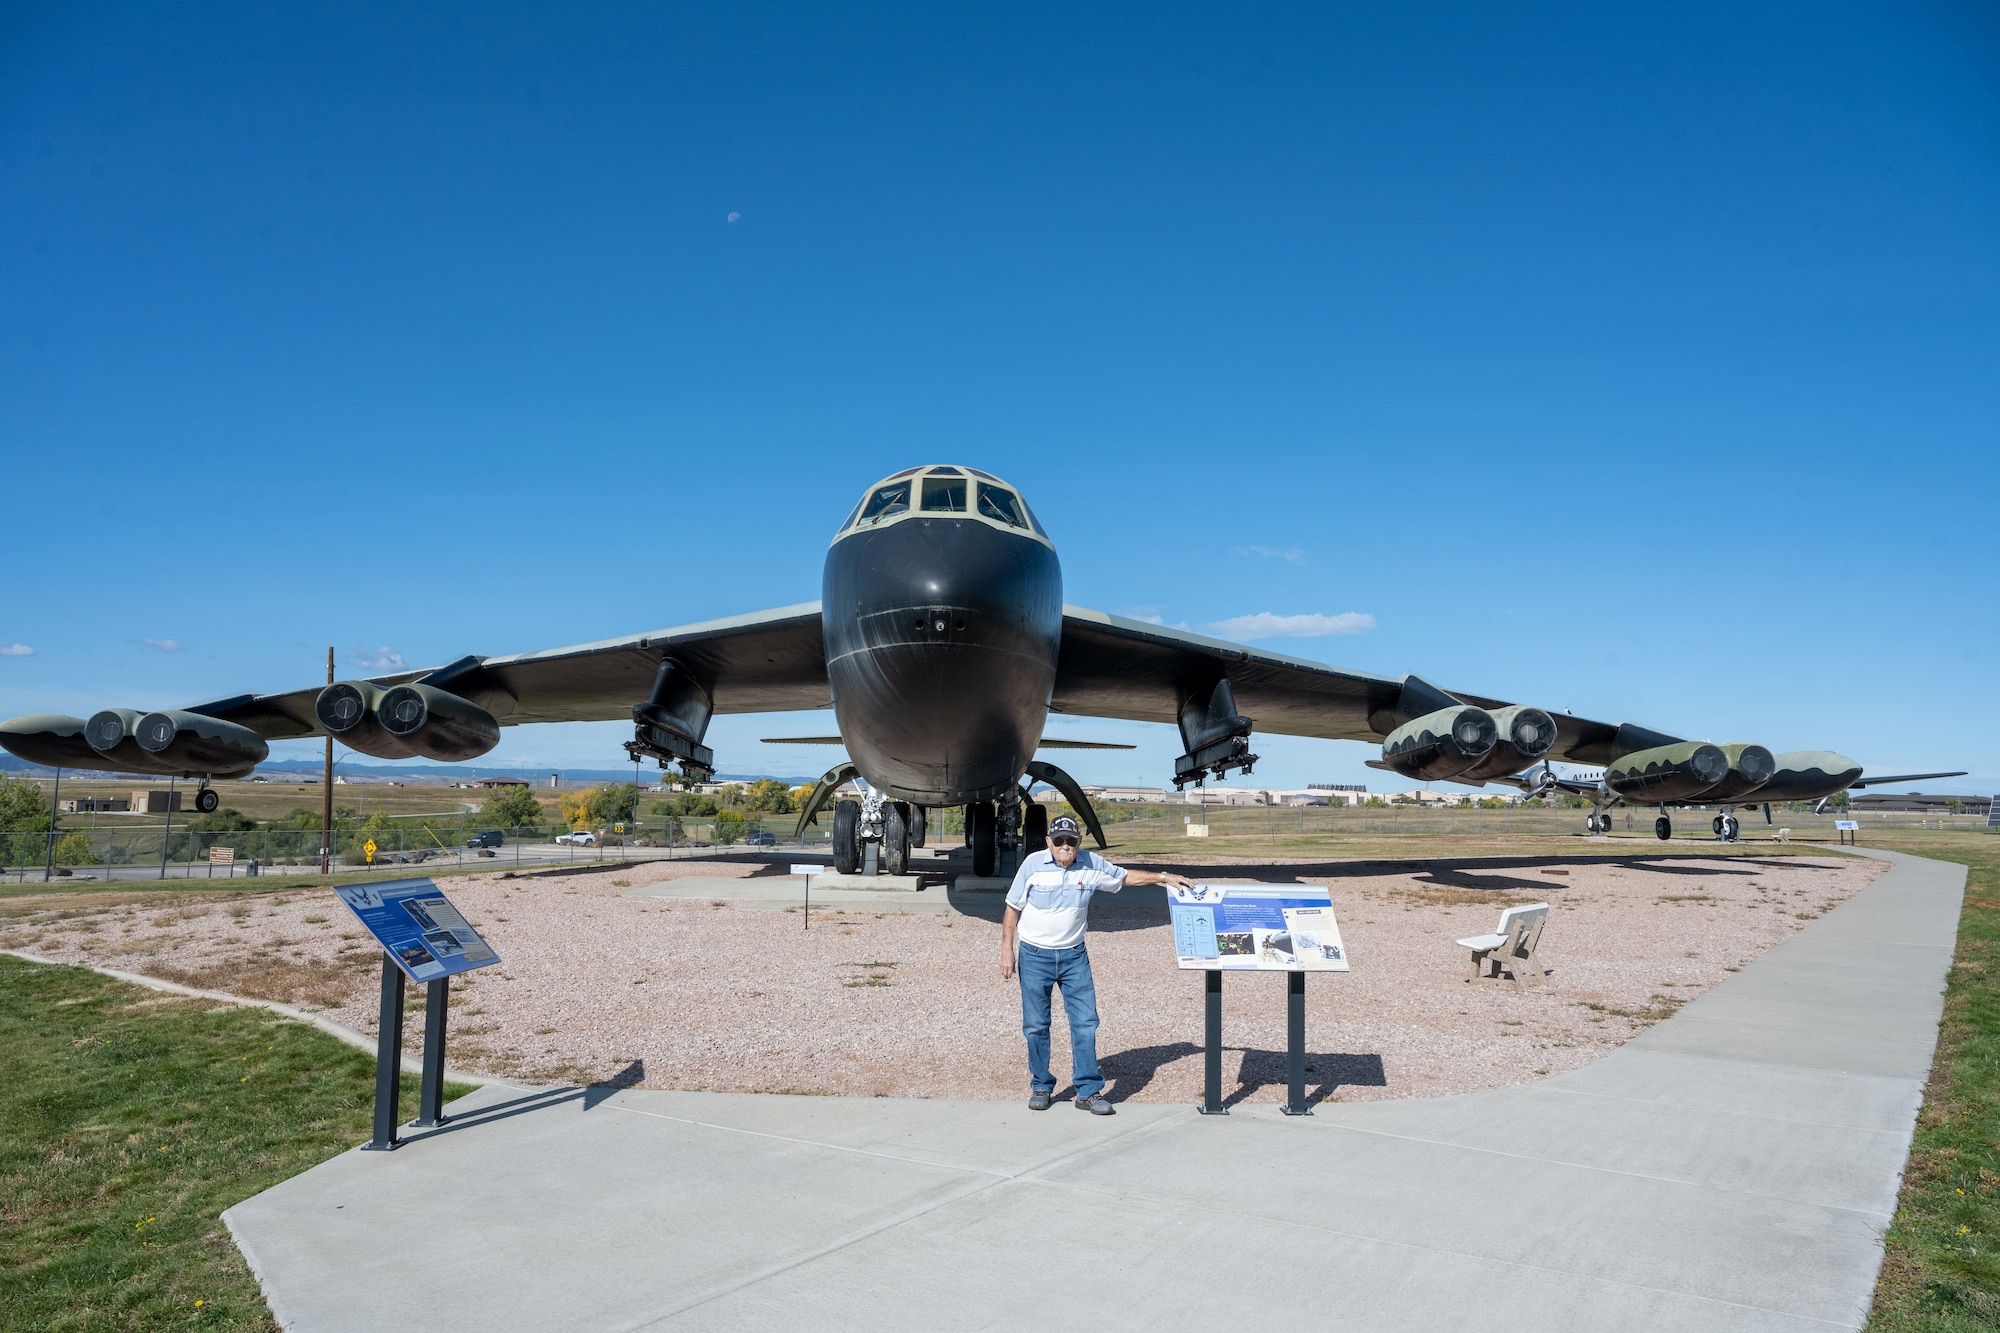 Mr. Robert D. Ball, former 28th Bomb Wing aircraft maintenance superintendent, poses for a photo with a B-52 Stratofortress at the South Dakota Air and Space Museum in Box Elder, South Dakota, Oct. 4, 2023. Ball served at Ellsworth Air Force base from 1955 to 1965. (U.S. Air Force photo by Spc3 Adam Olson)